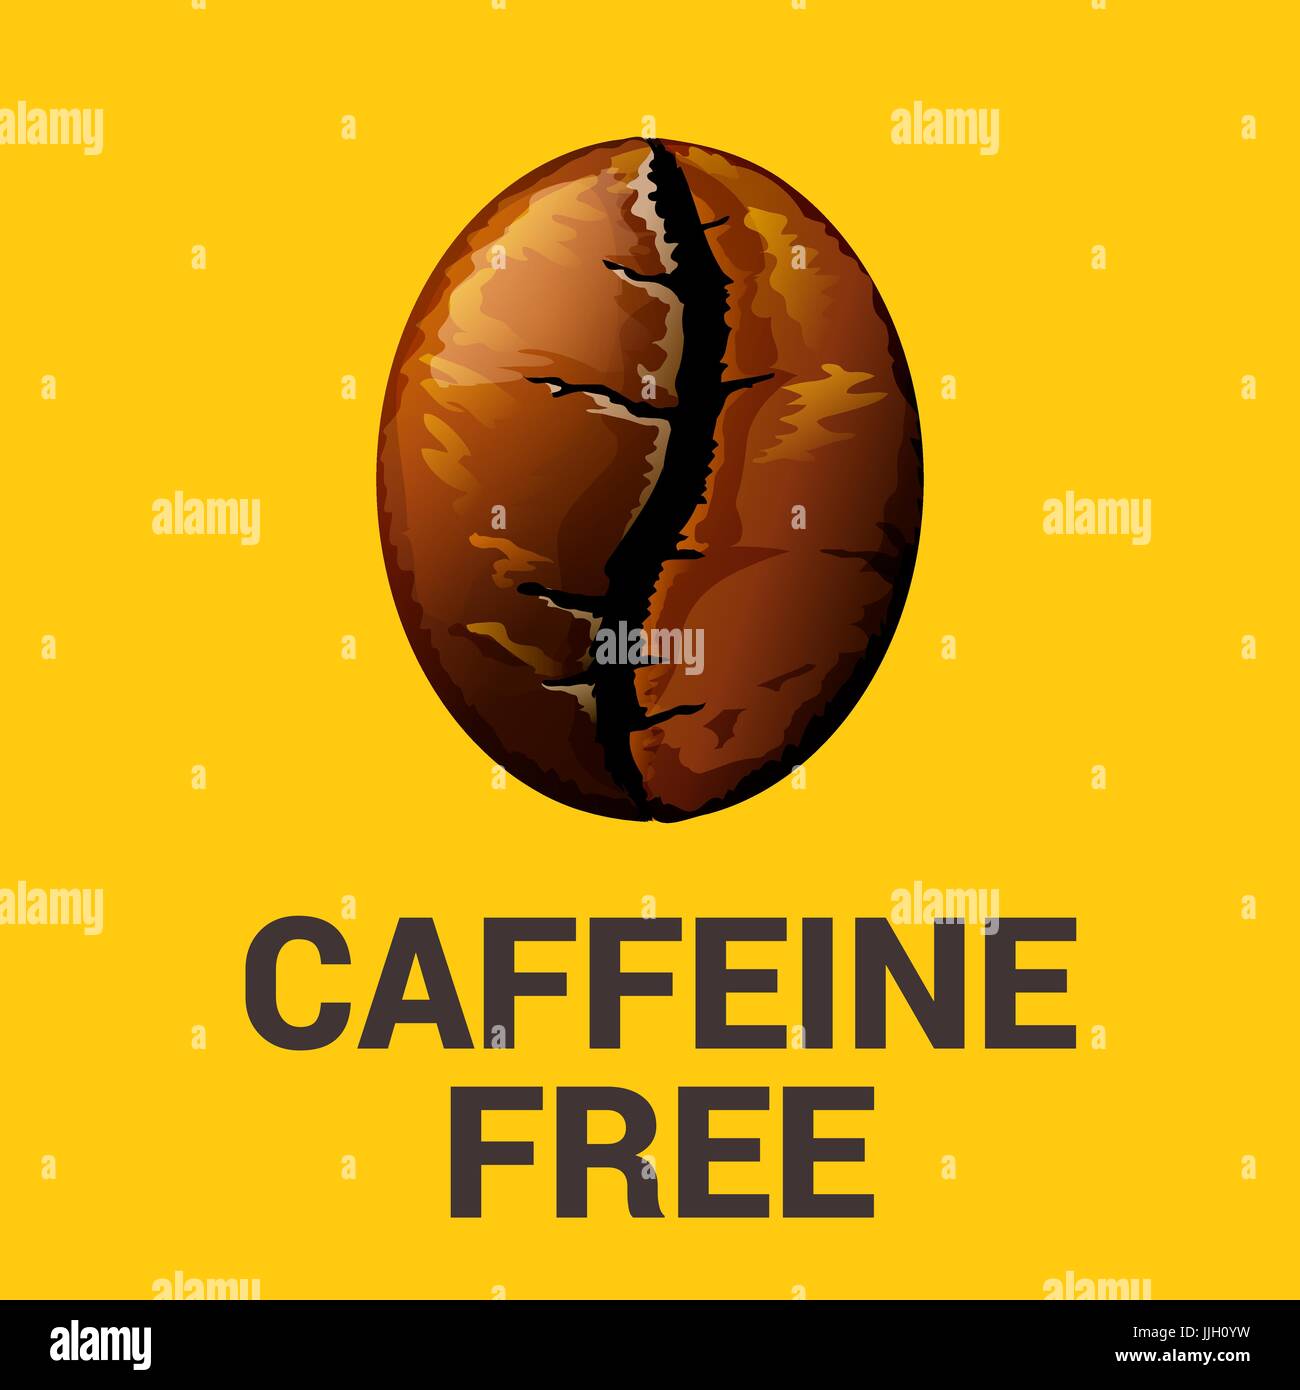 Caffeine free sign with coffee bean vector illustration Stock Vector